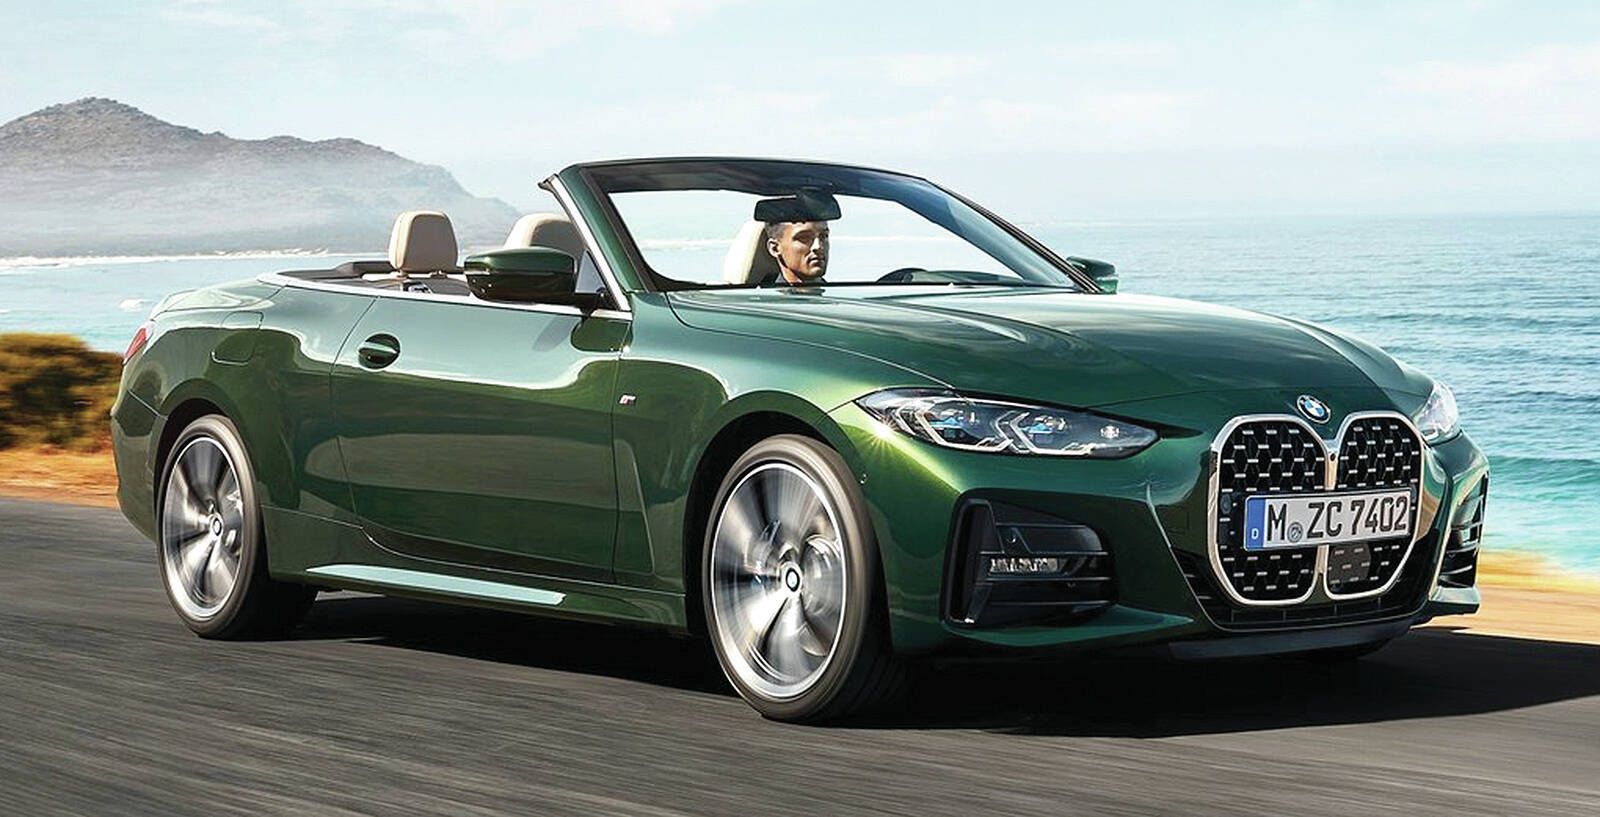 The base soft-top-convertible costs close to $8,500 more than the coupe. For now, the performance-oriented M4 and the M4 Competition models are coupe only. The convertible versions are expected later in the year. PHOTO: BMW